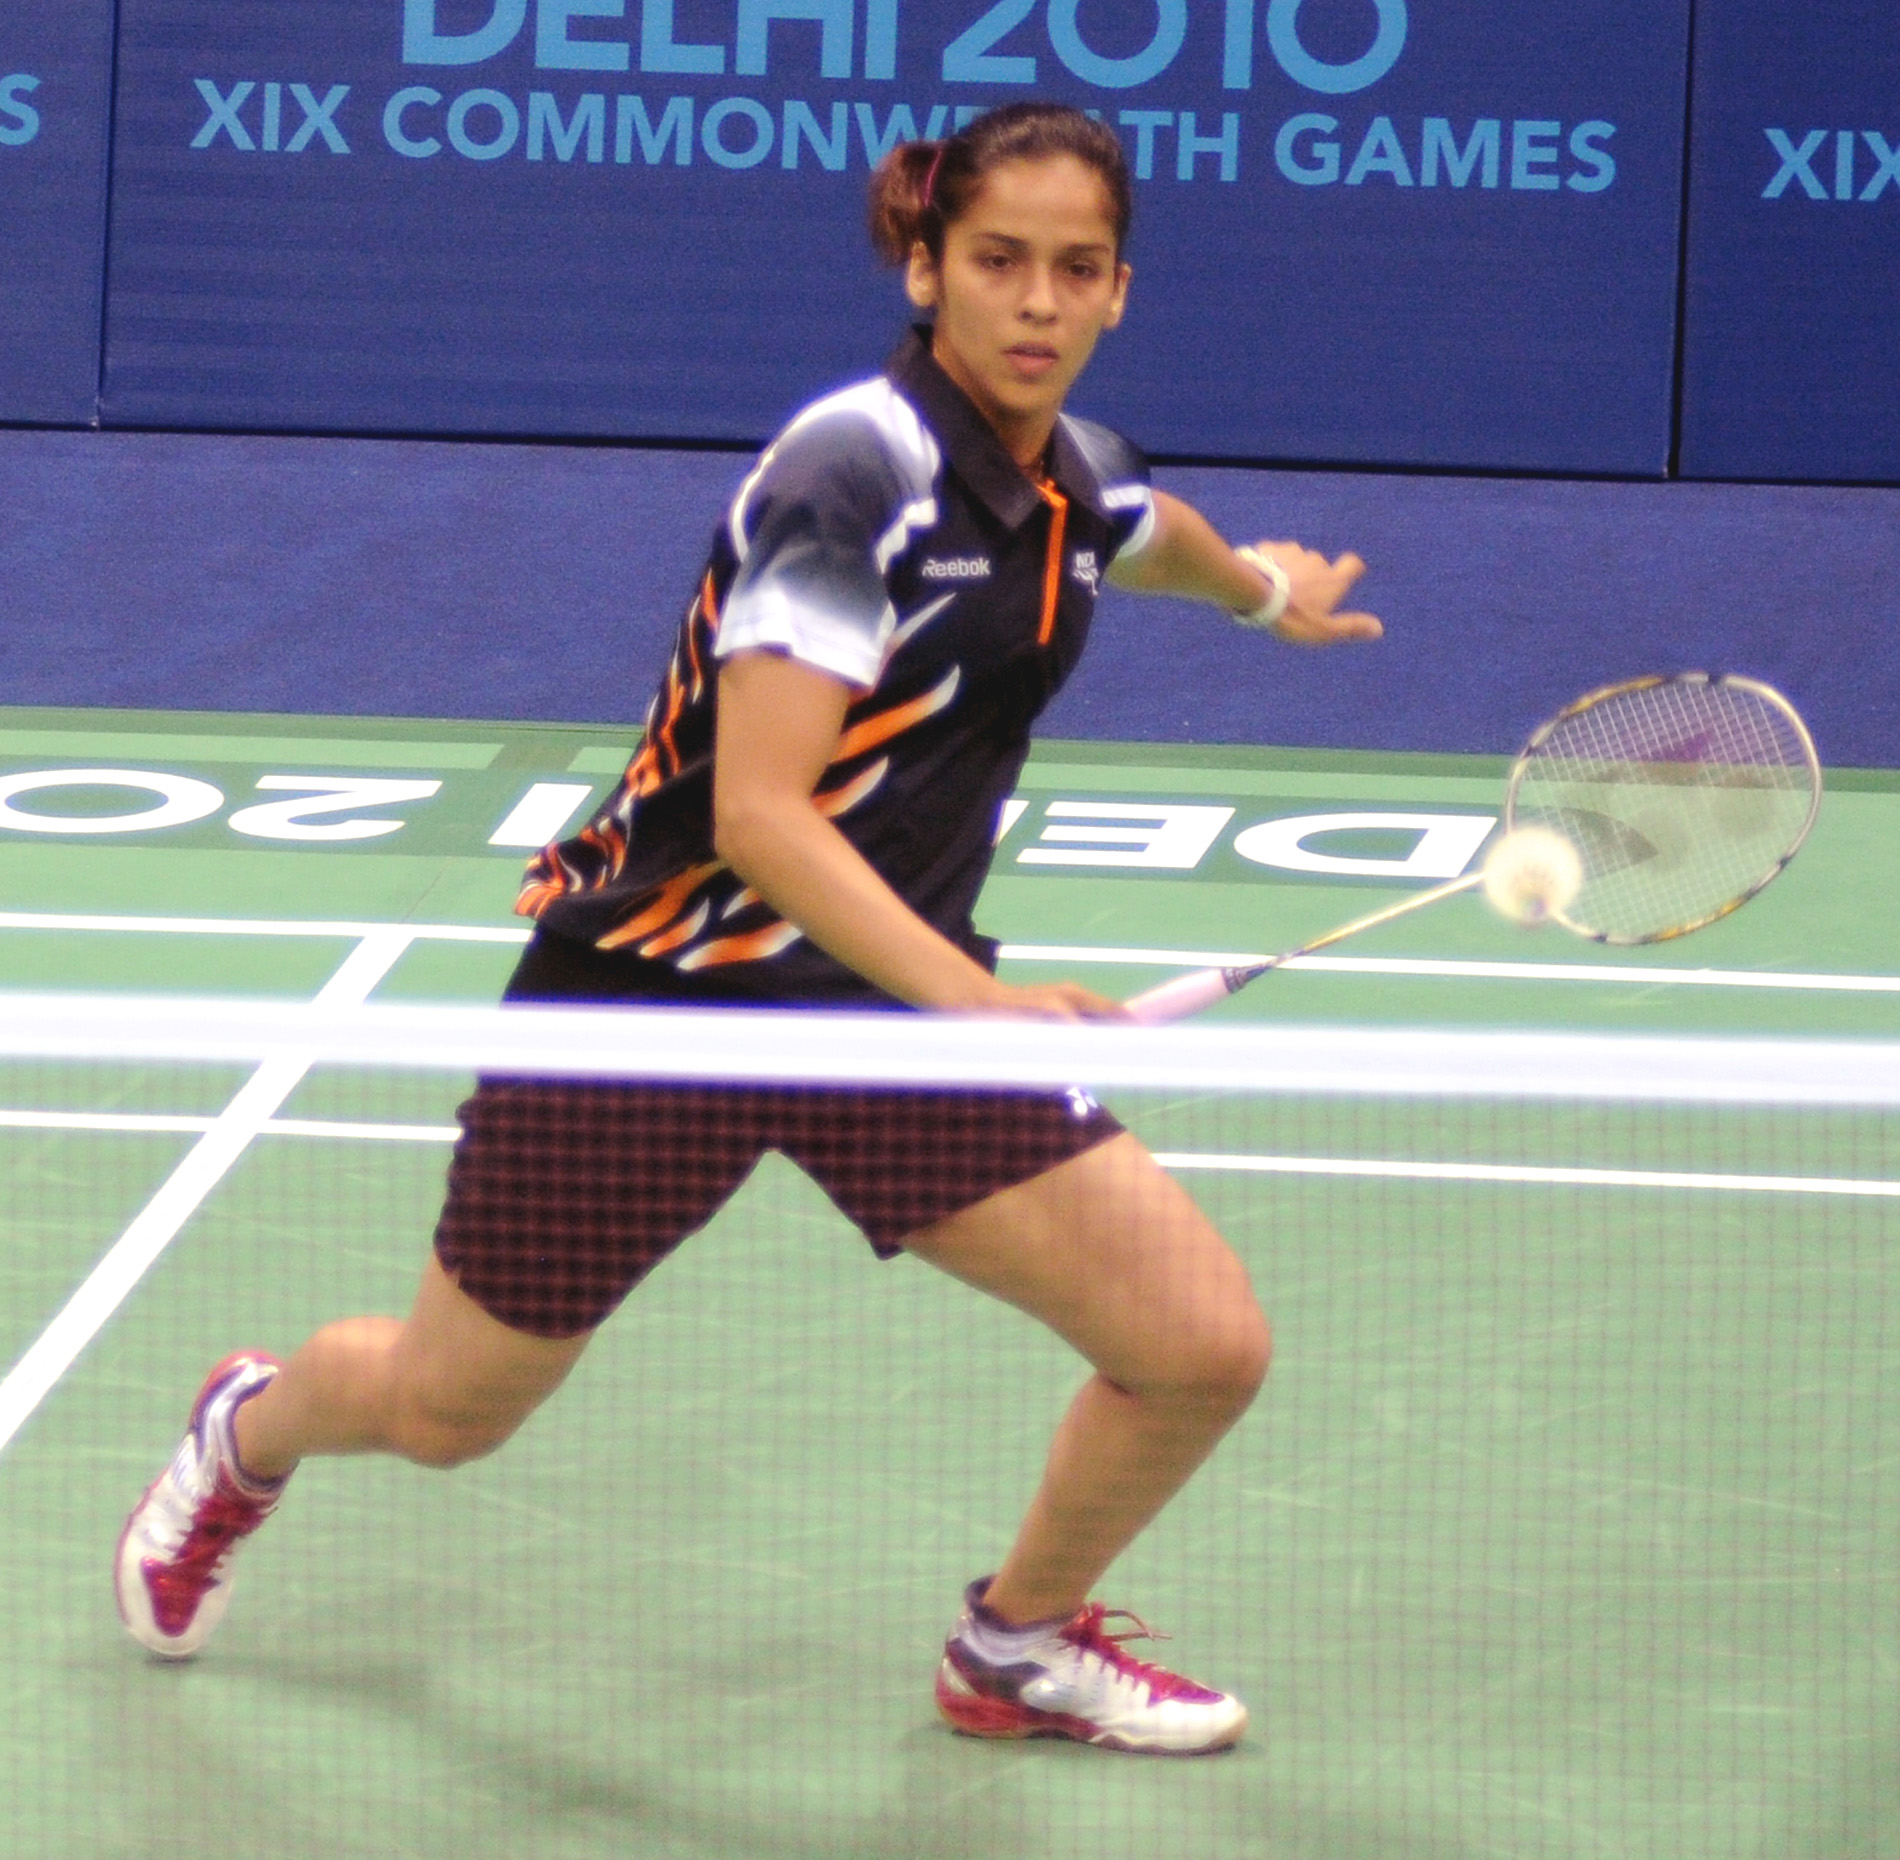 FileXIX Commonwealth Games-2010 Delhi Indian shuttler Saina Nehwal in action against her Barbados opponent during their match in the preliminary round of badminton event, at Sirifort Sports Complex, in New Delhi.jpg -